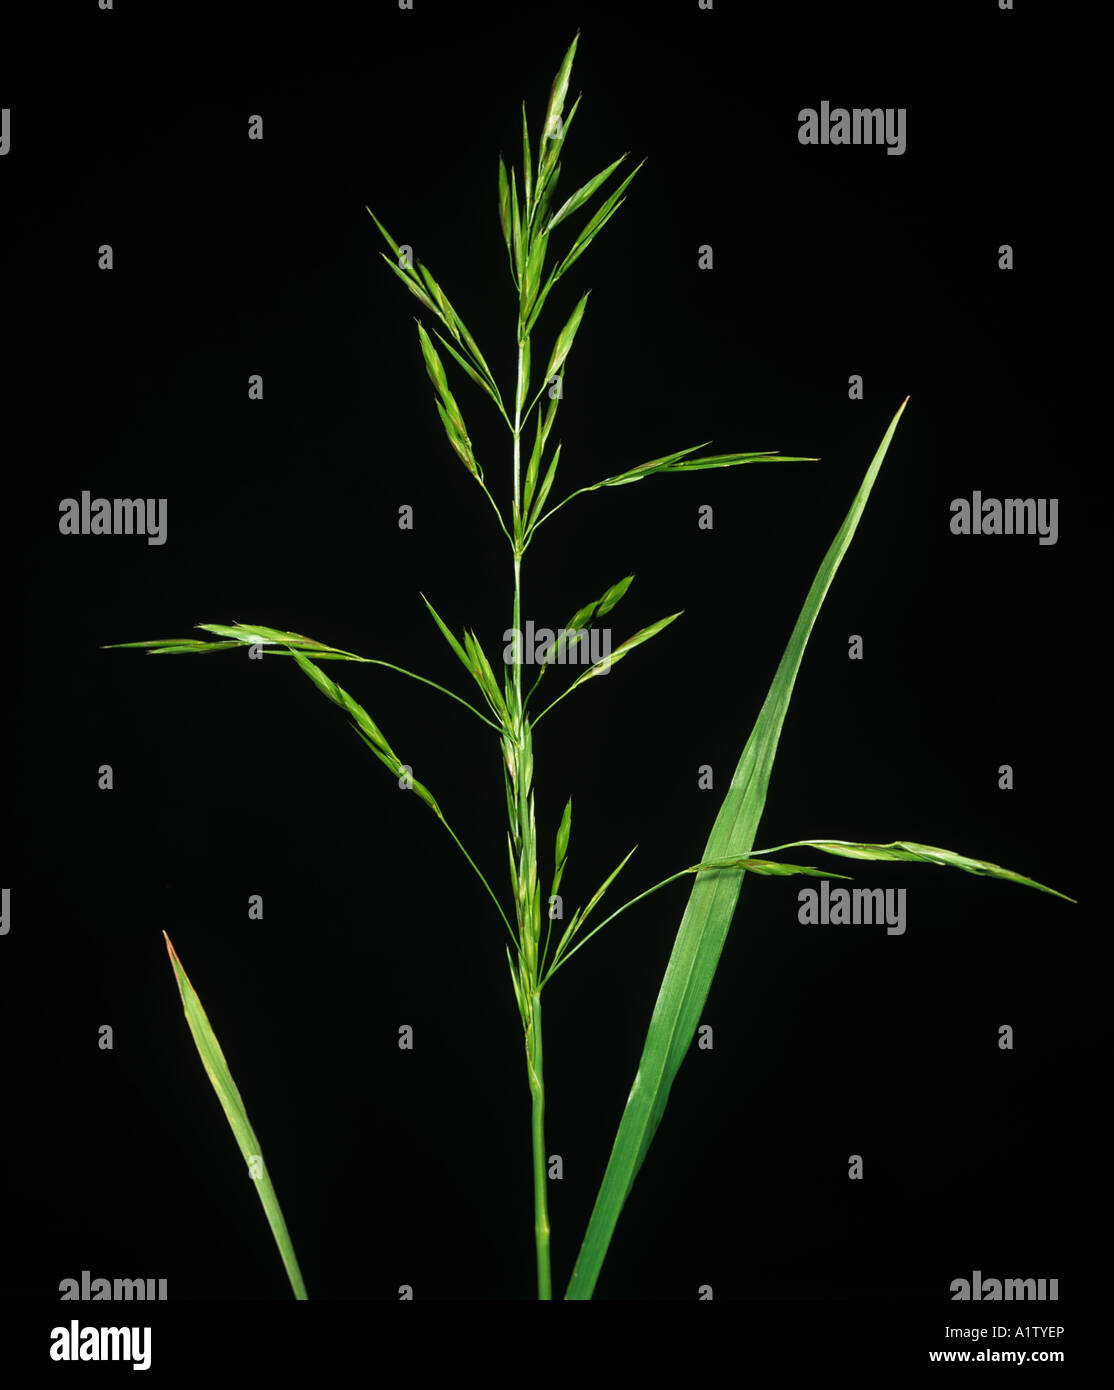 Brome Bromus inertus flower spike or inflorescence Stock Photo